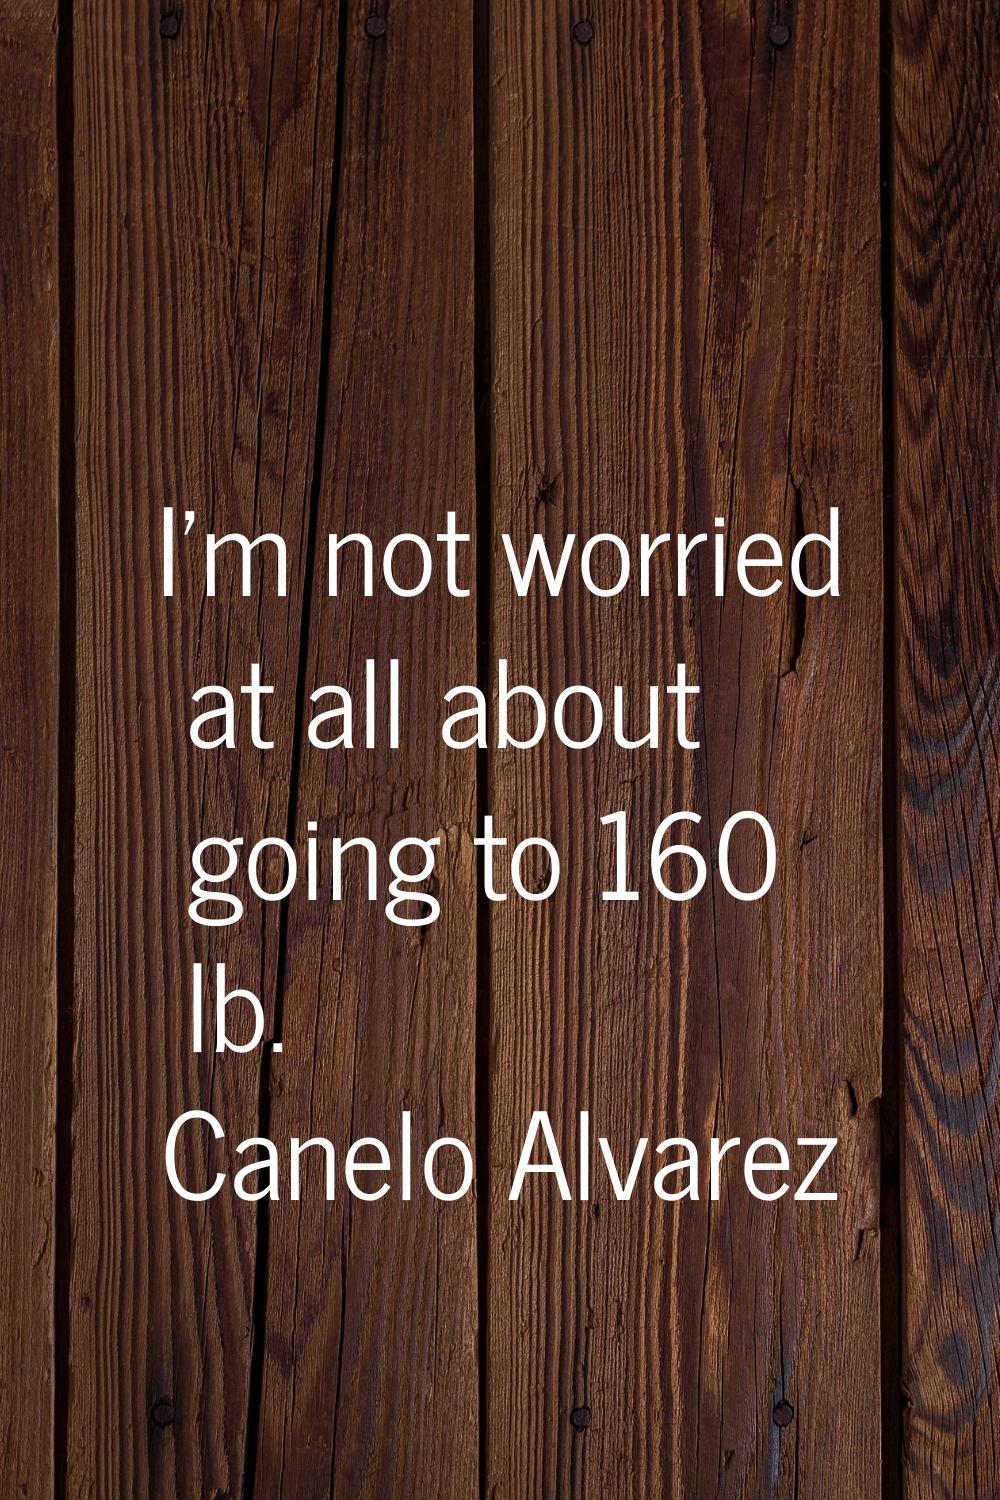 I'm not worried at all about going to 160 lb.